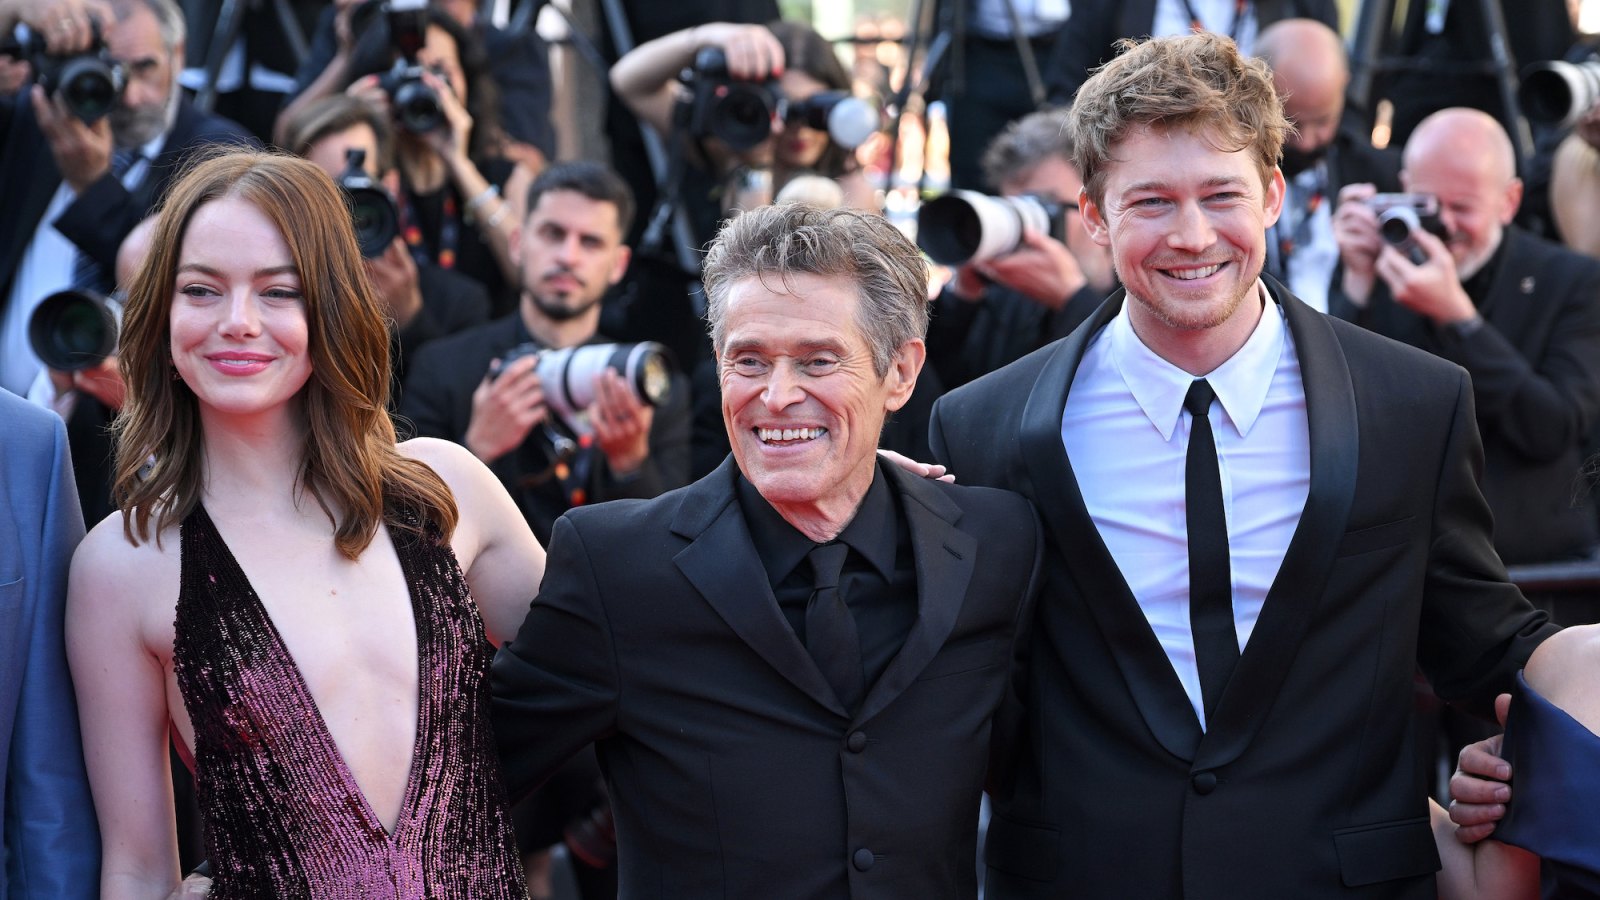 Emma Stone and Joe Alwyn Pose Together at Cannes Film Festival